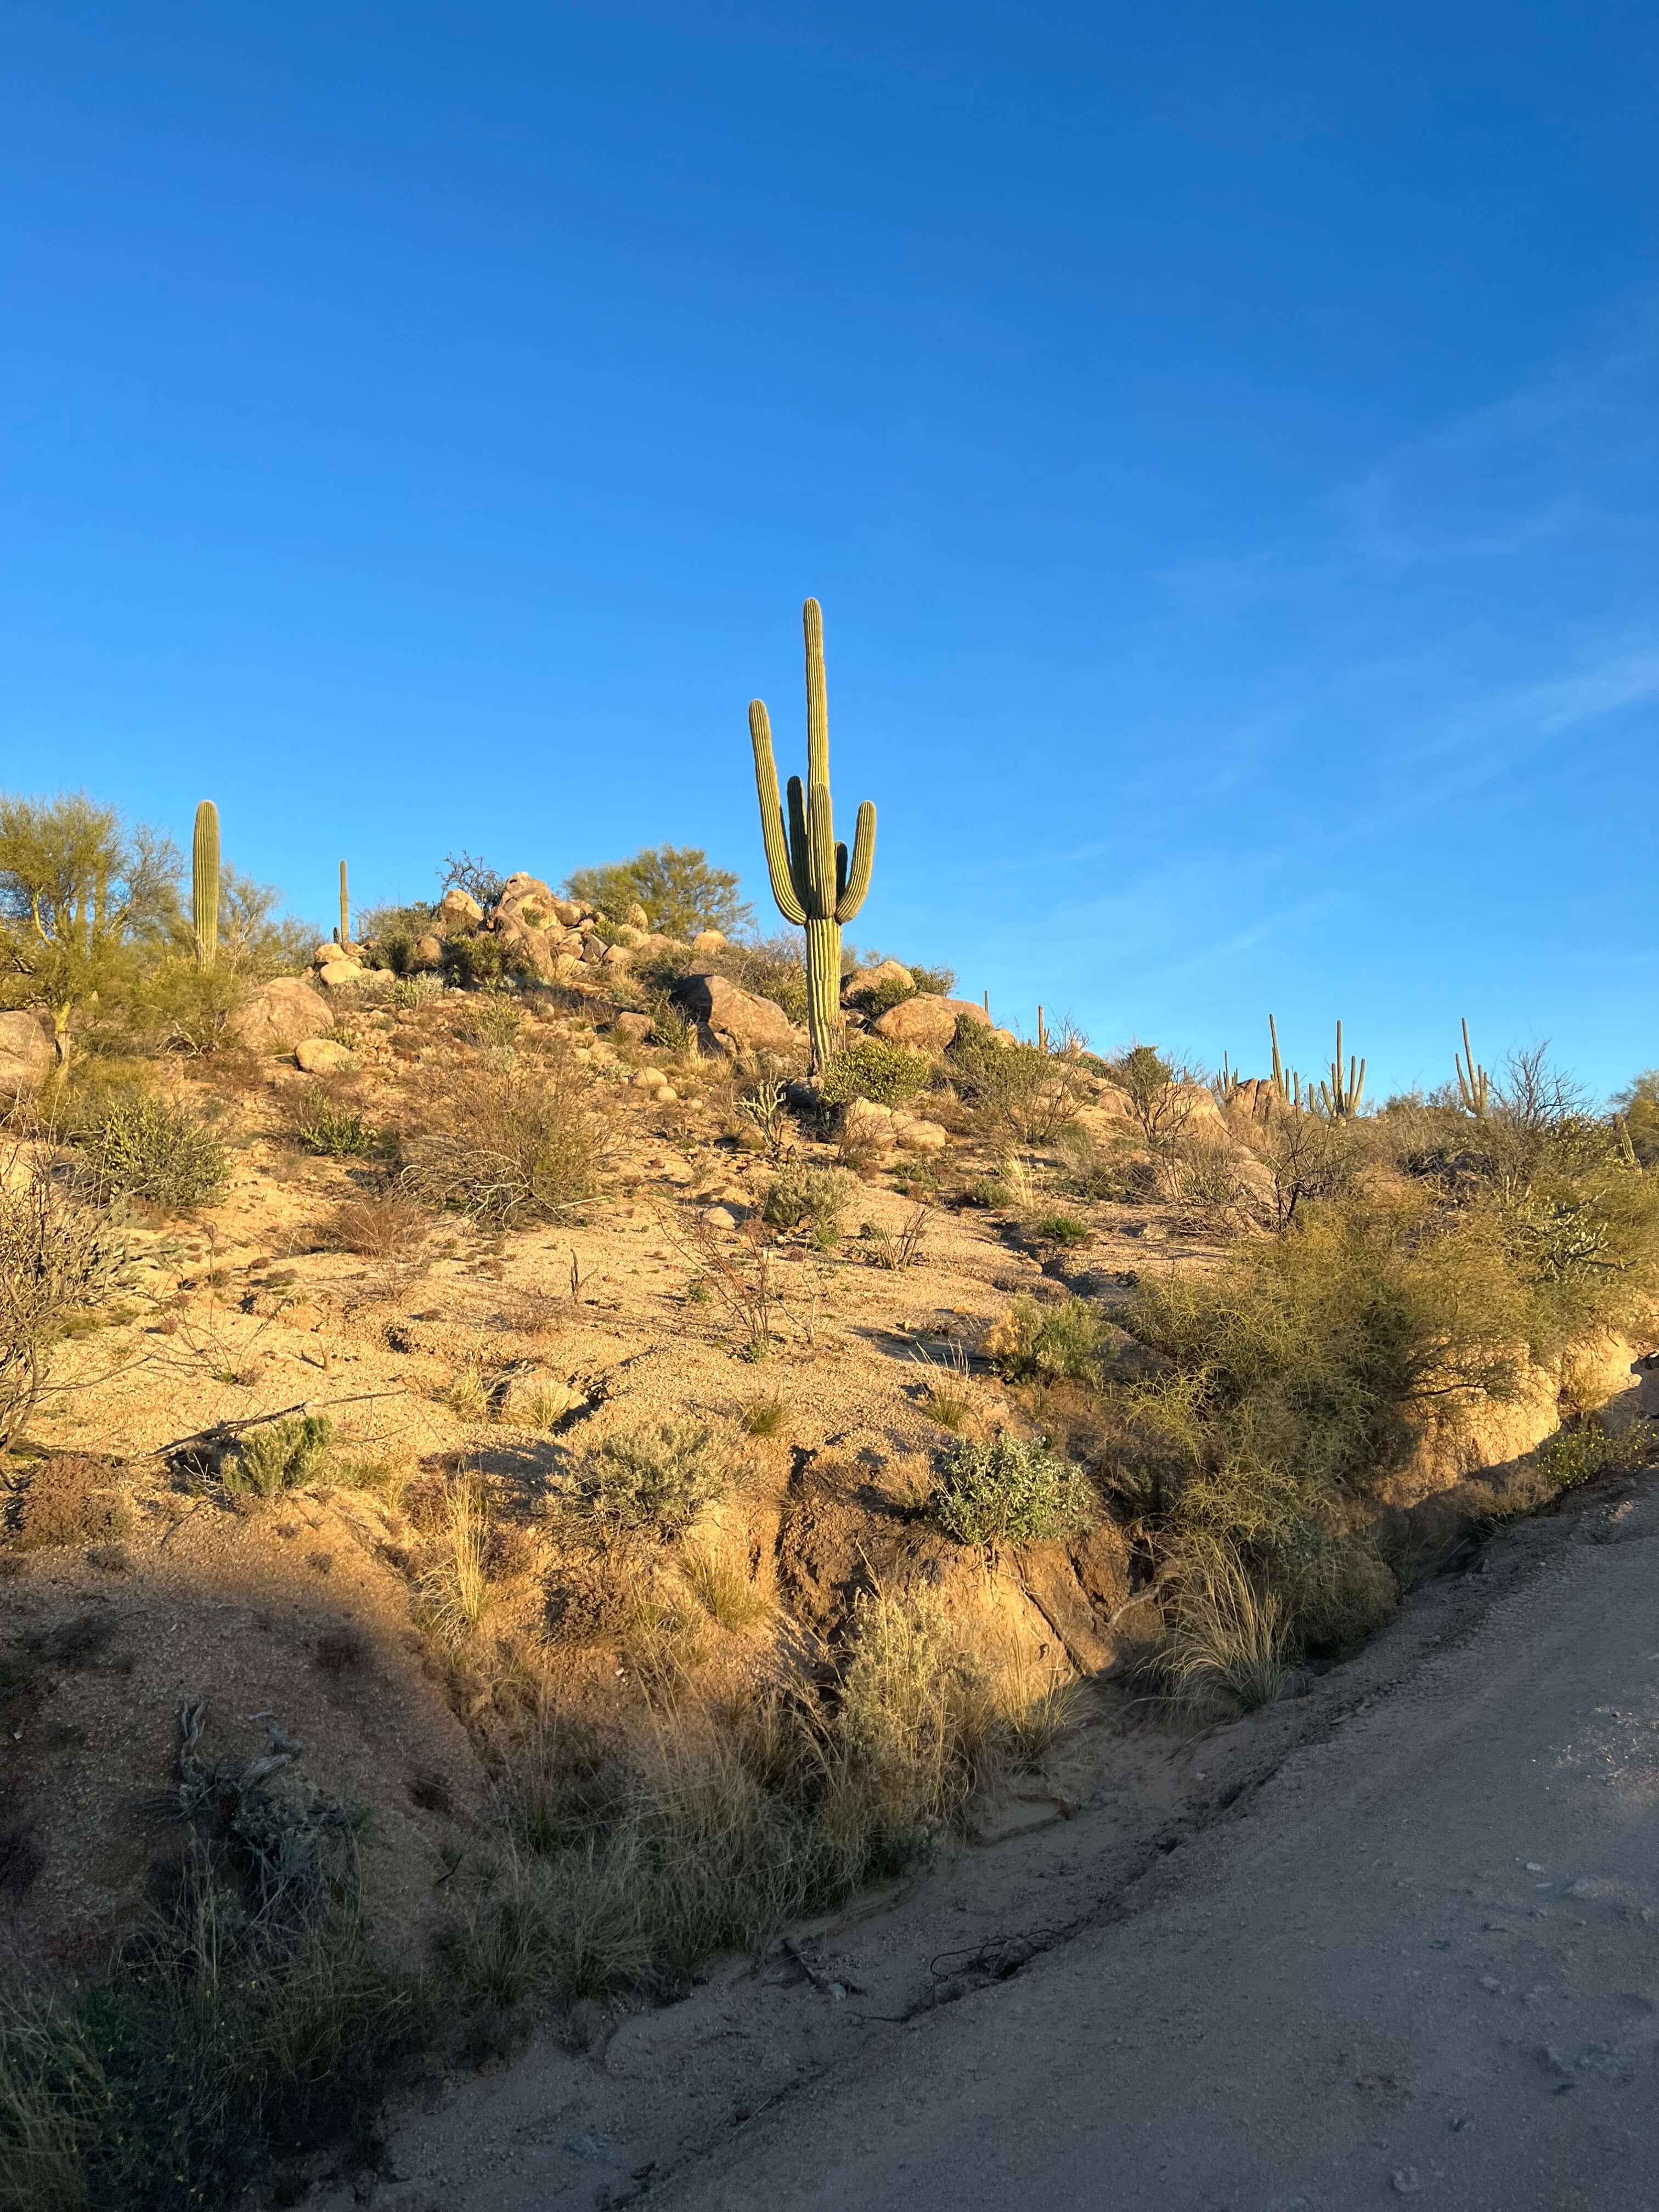 Saguaro on the Side of a Dirt Road